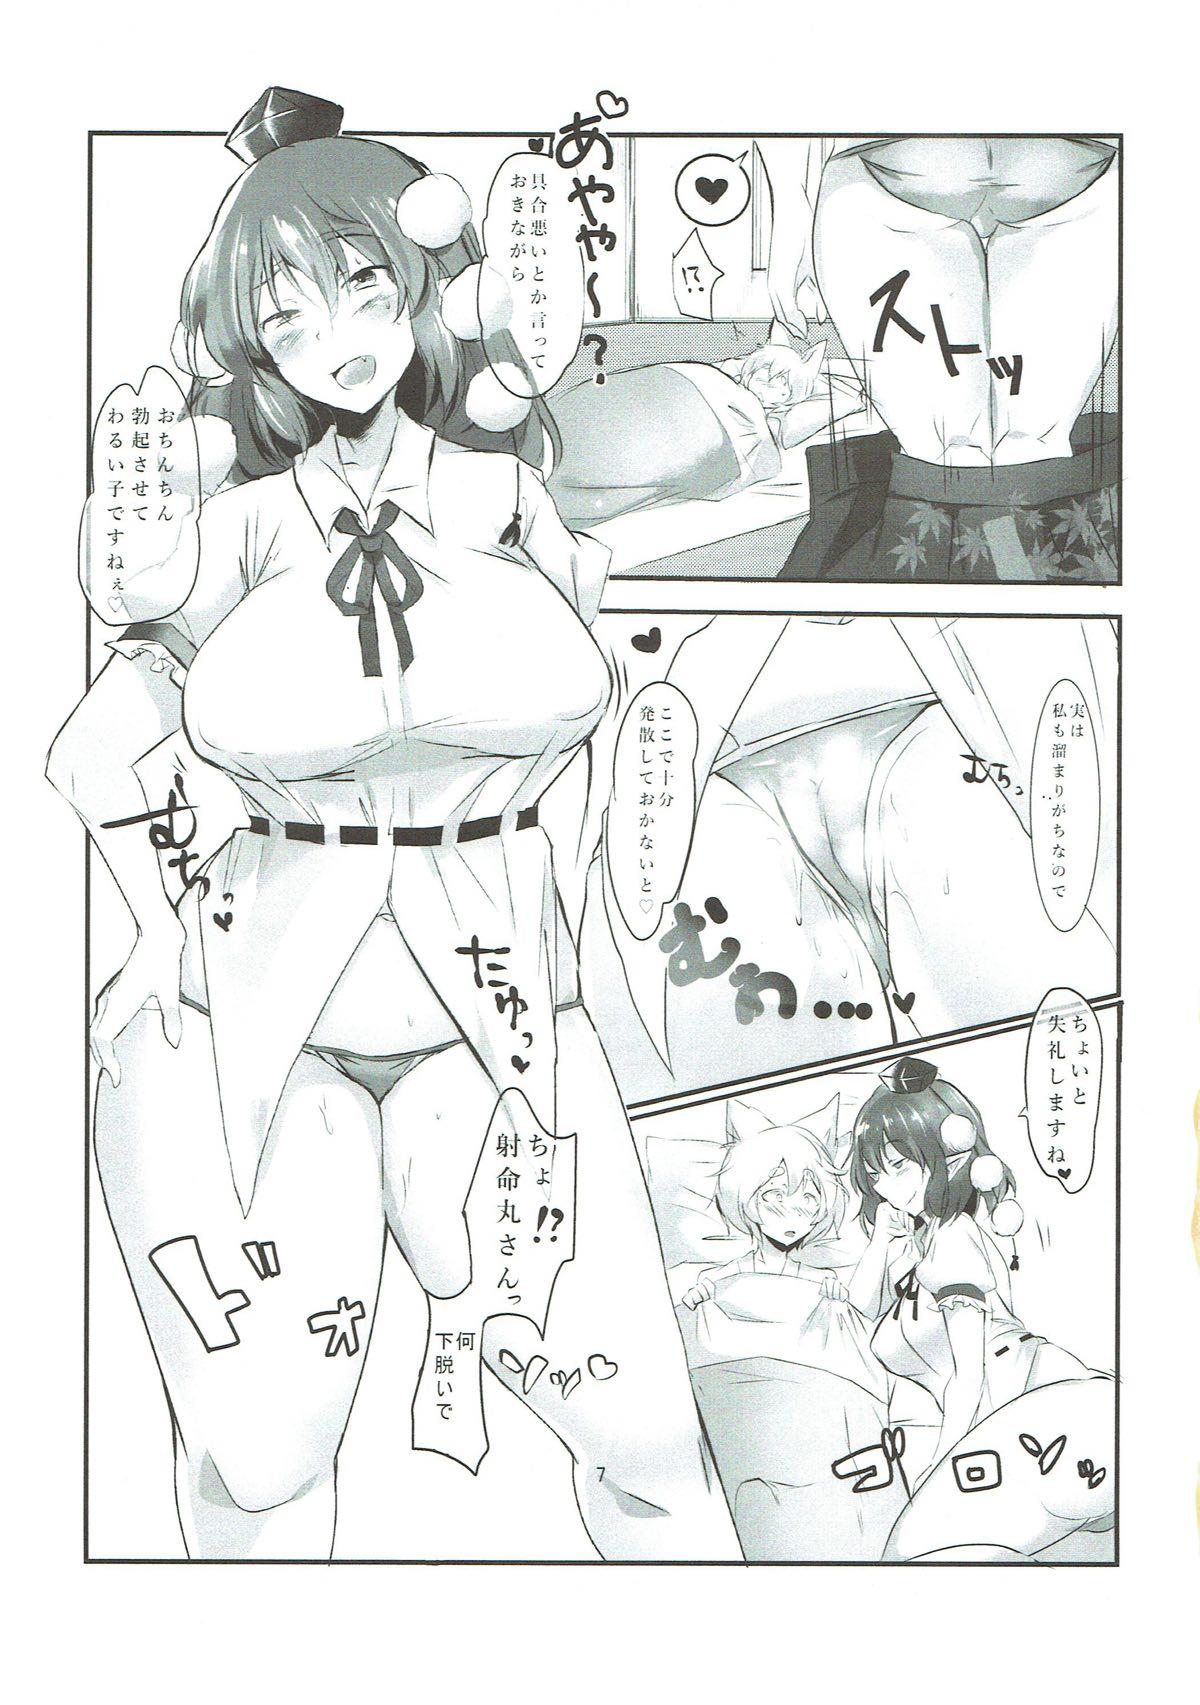 Perfect Body Porn あやもみ サンドオーガズム 東方Project - Touhou project Machine - Page 8